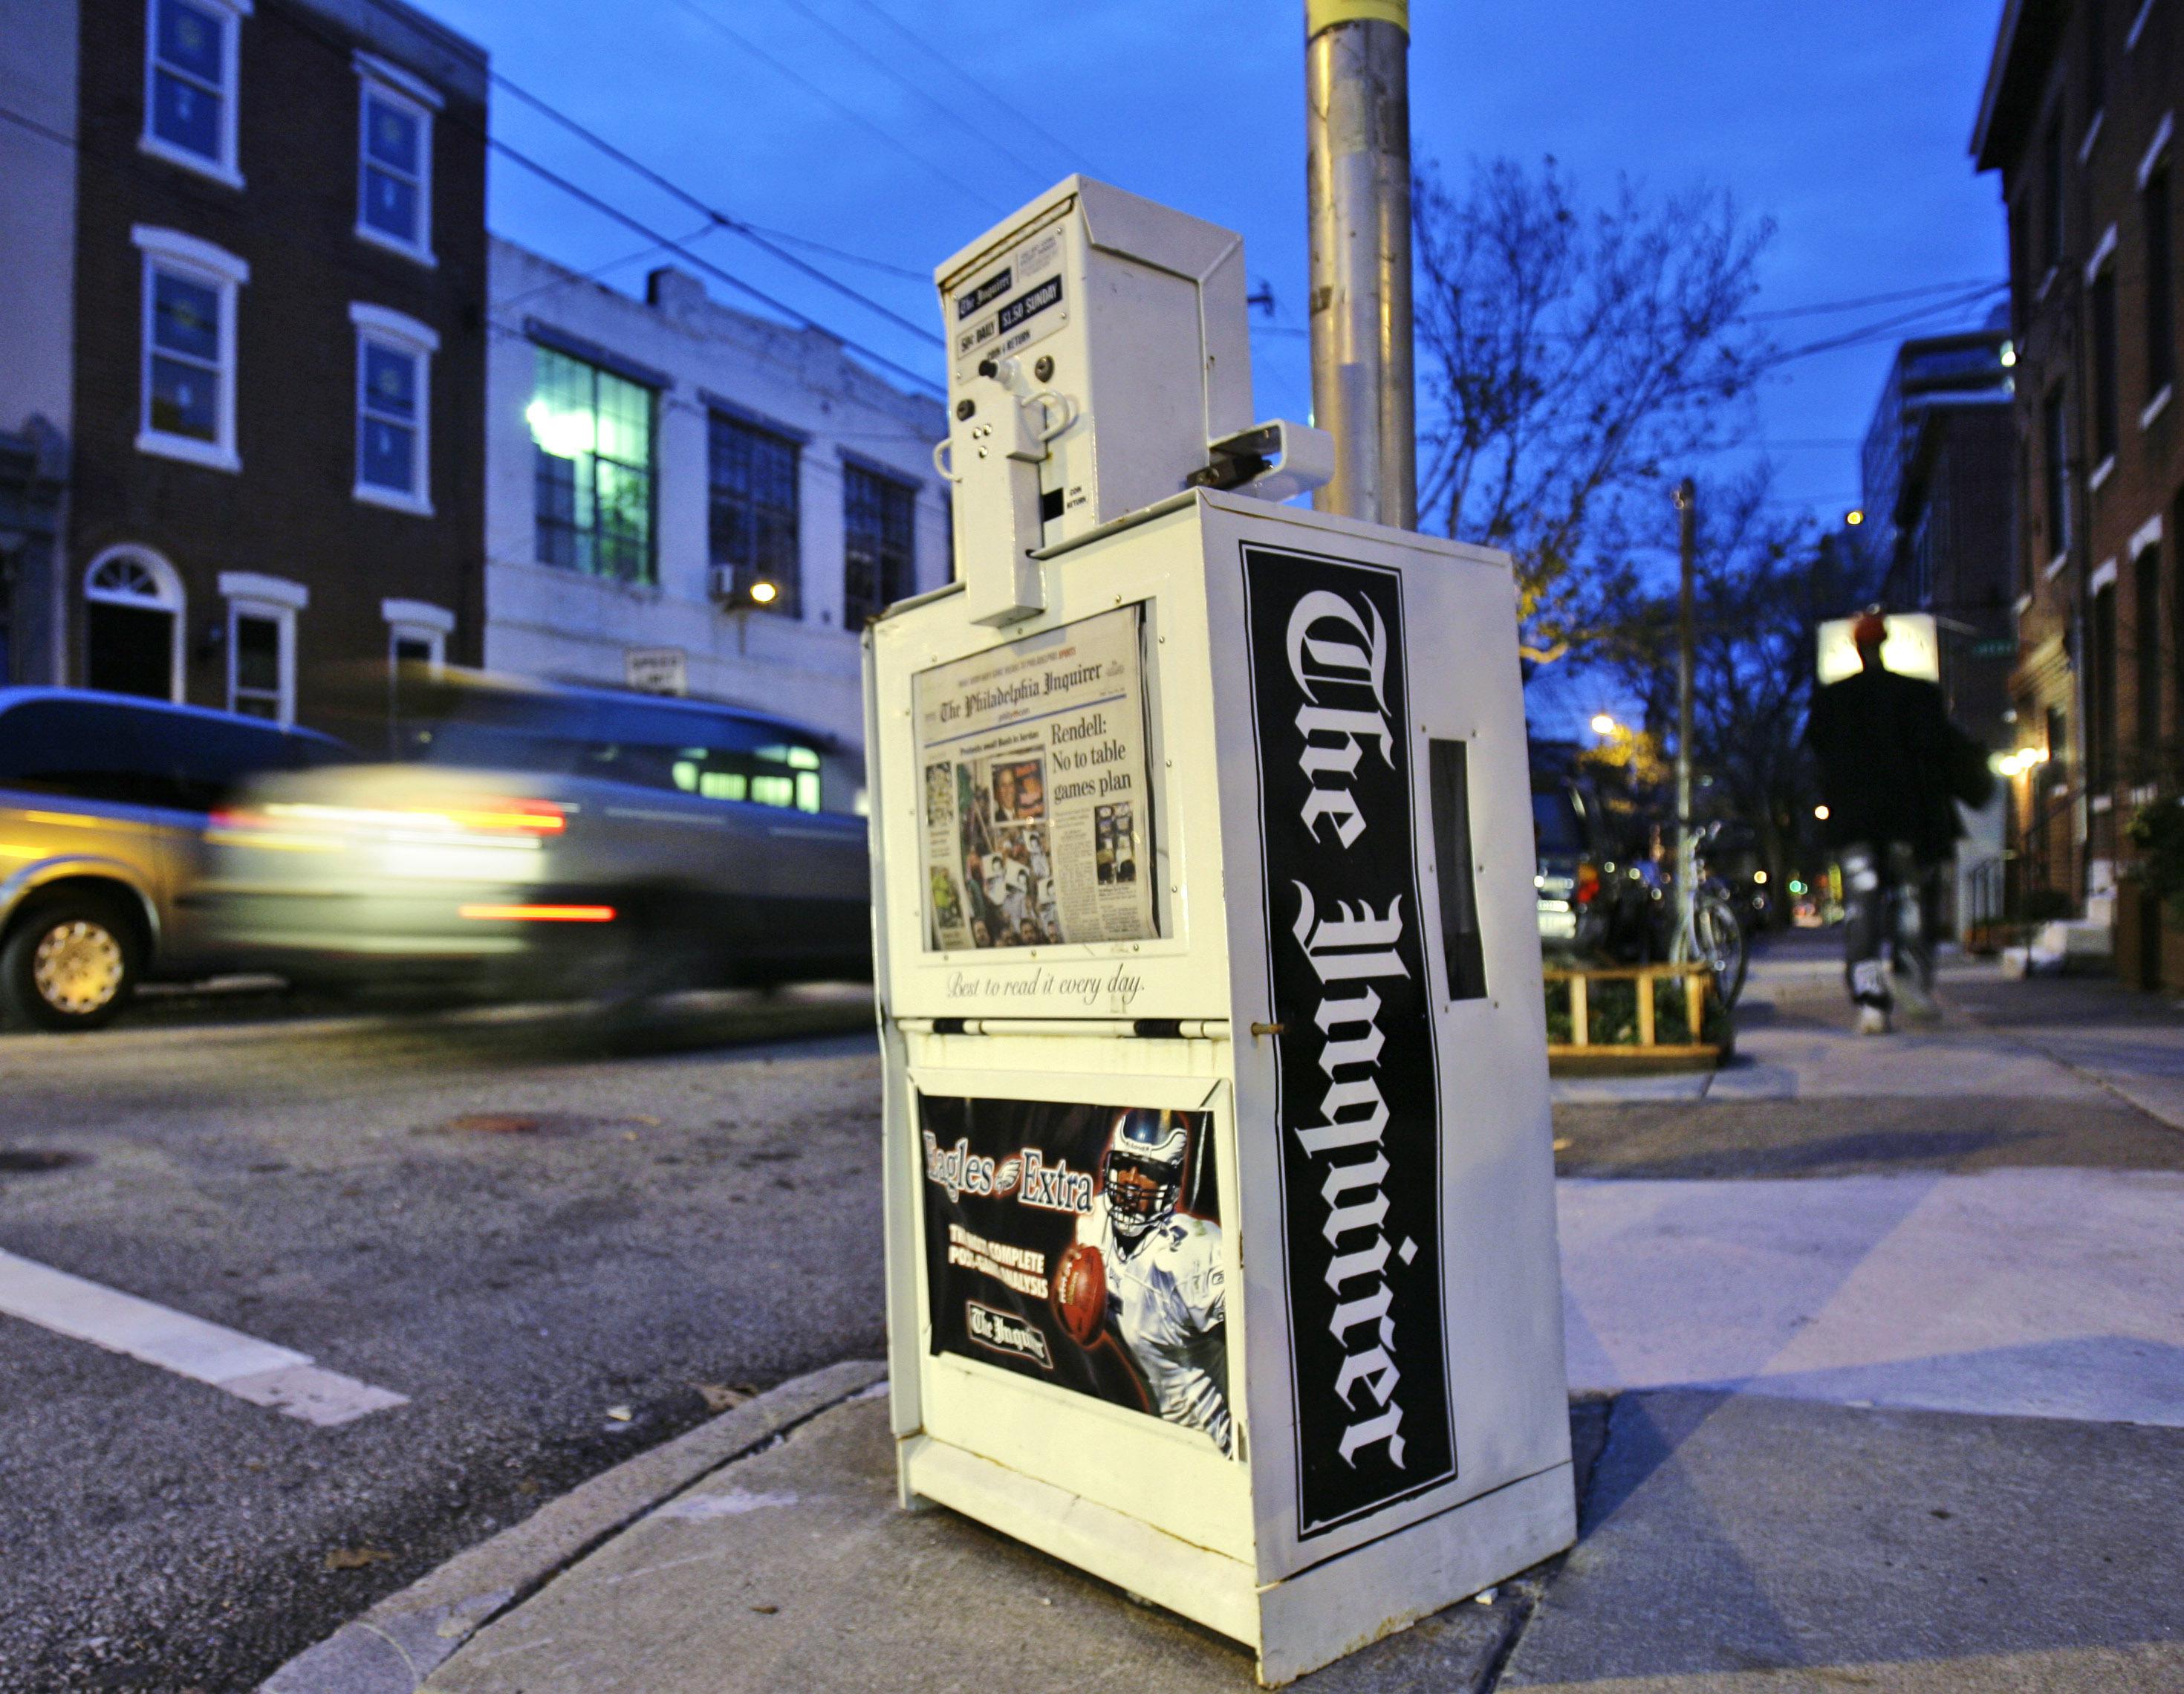 Philadelphia Inquirer hit by cyberattack causing newspaper's